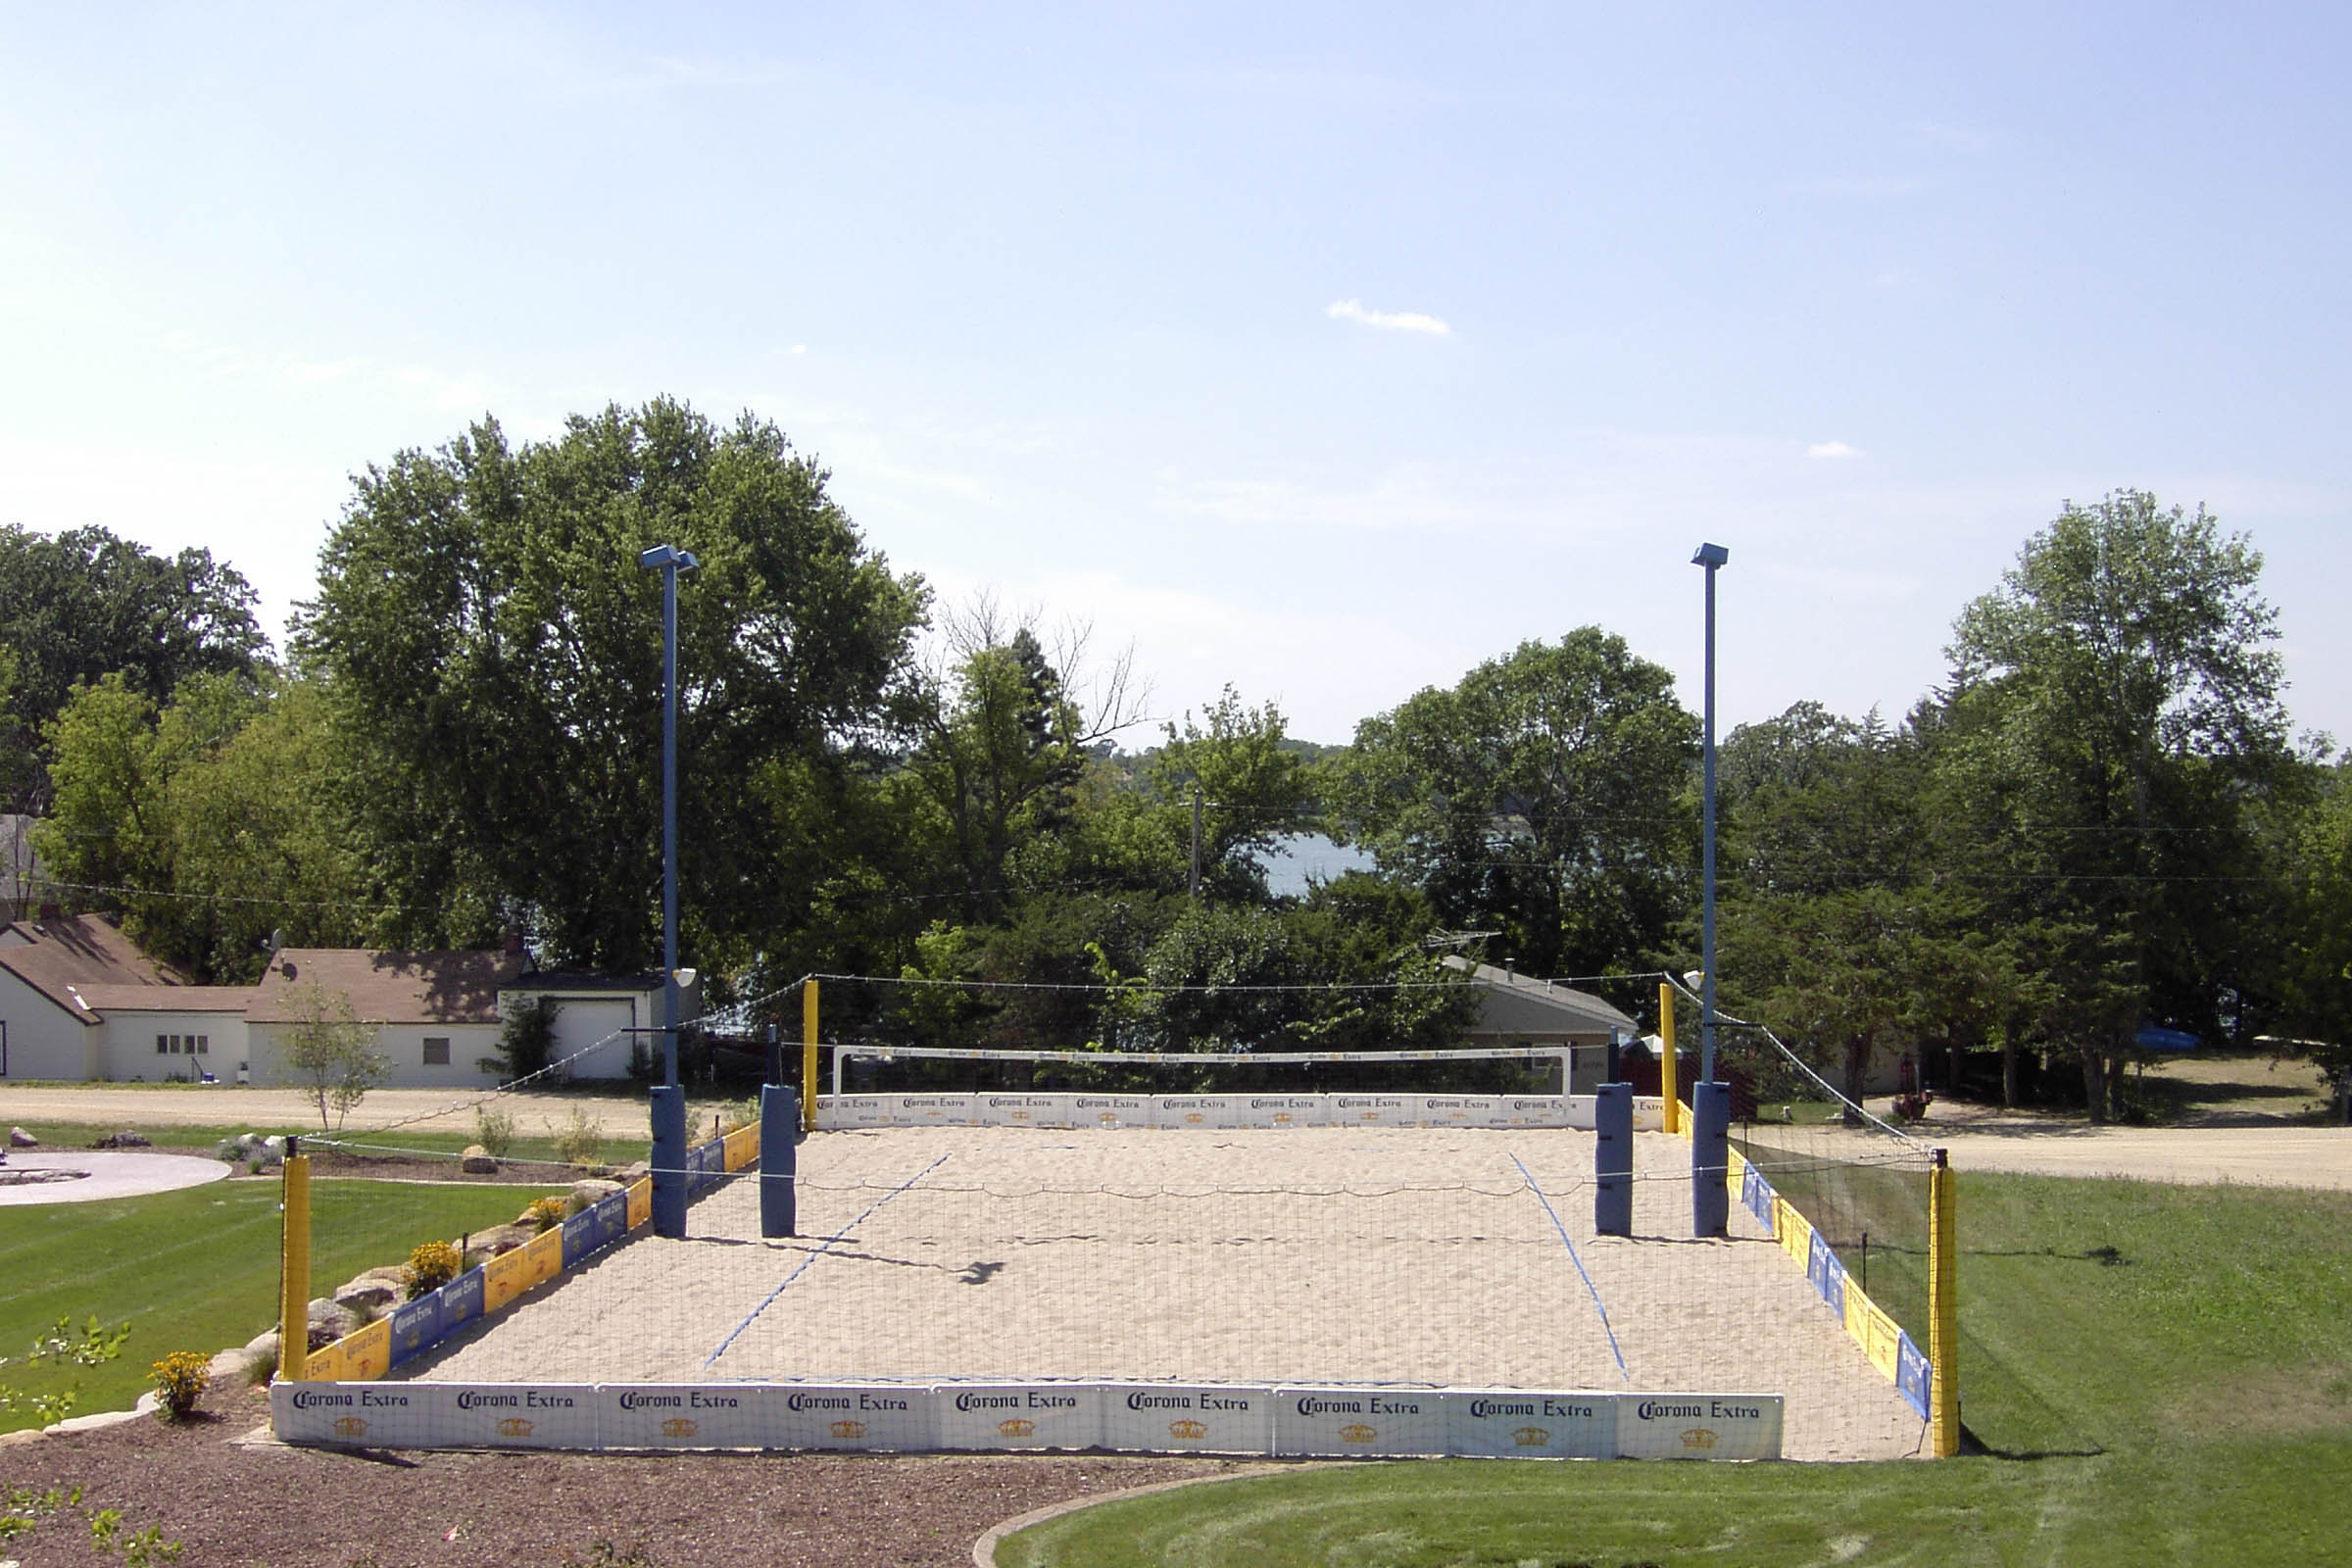 How To Construct A Volleyball Court